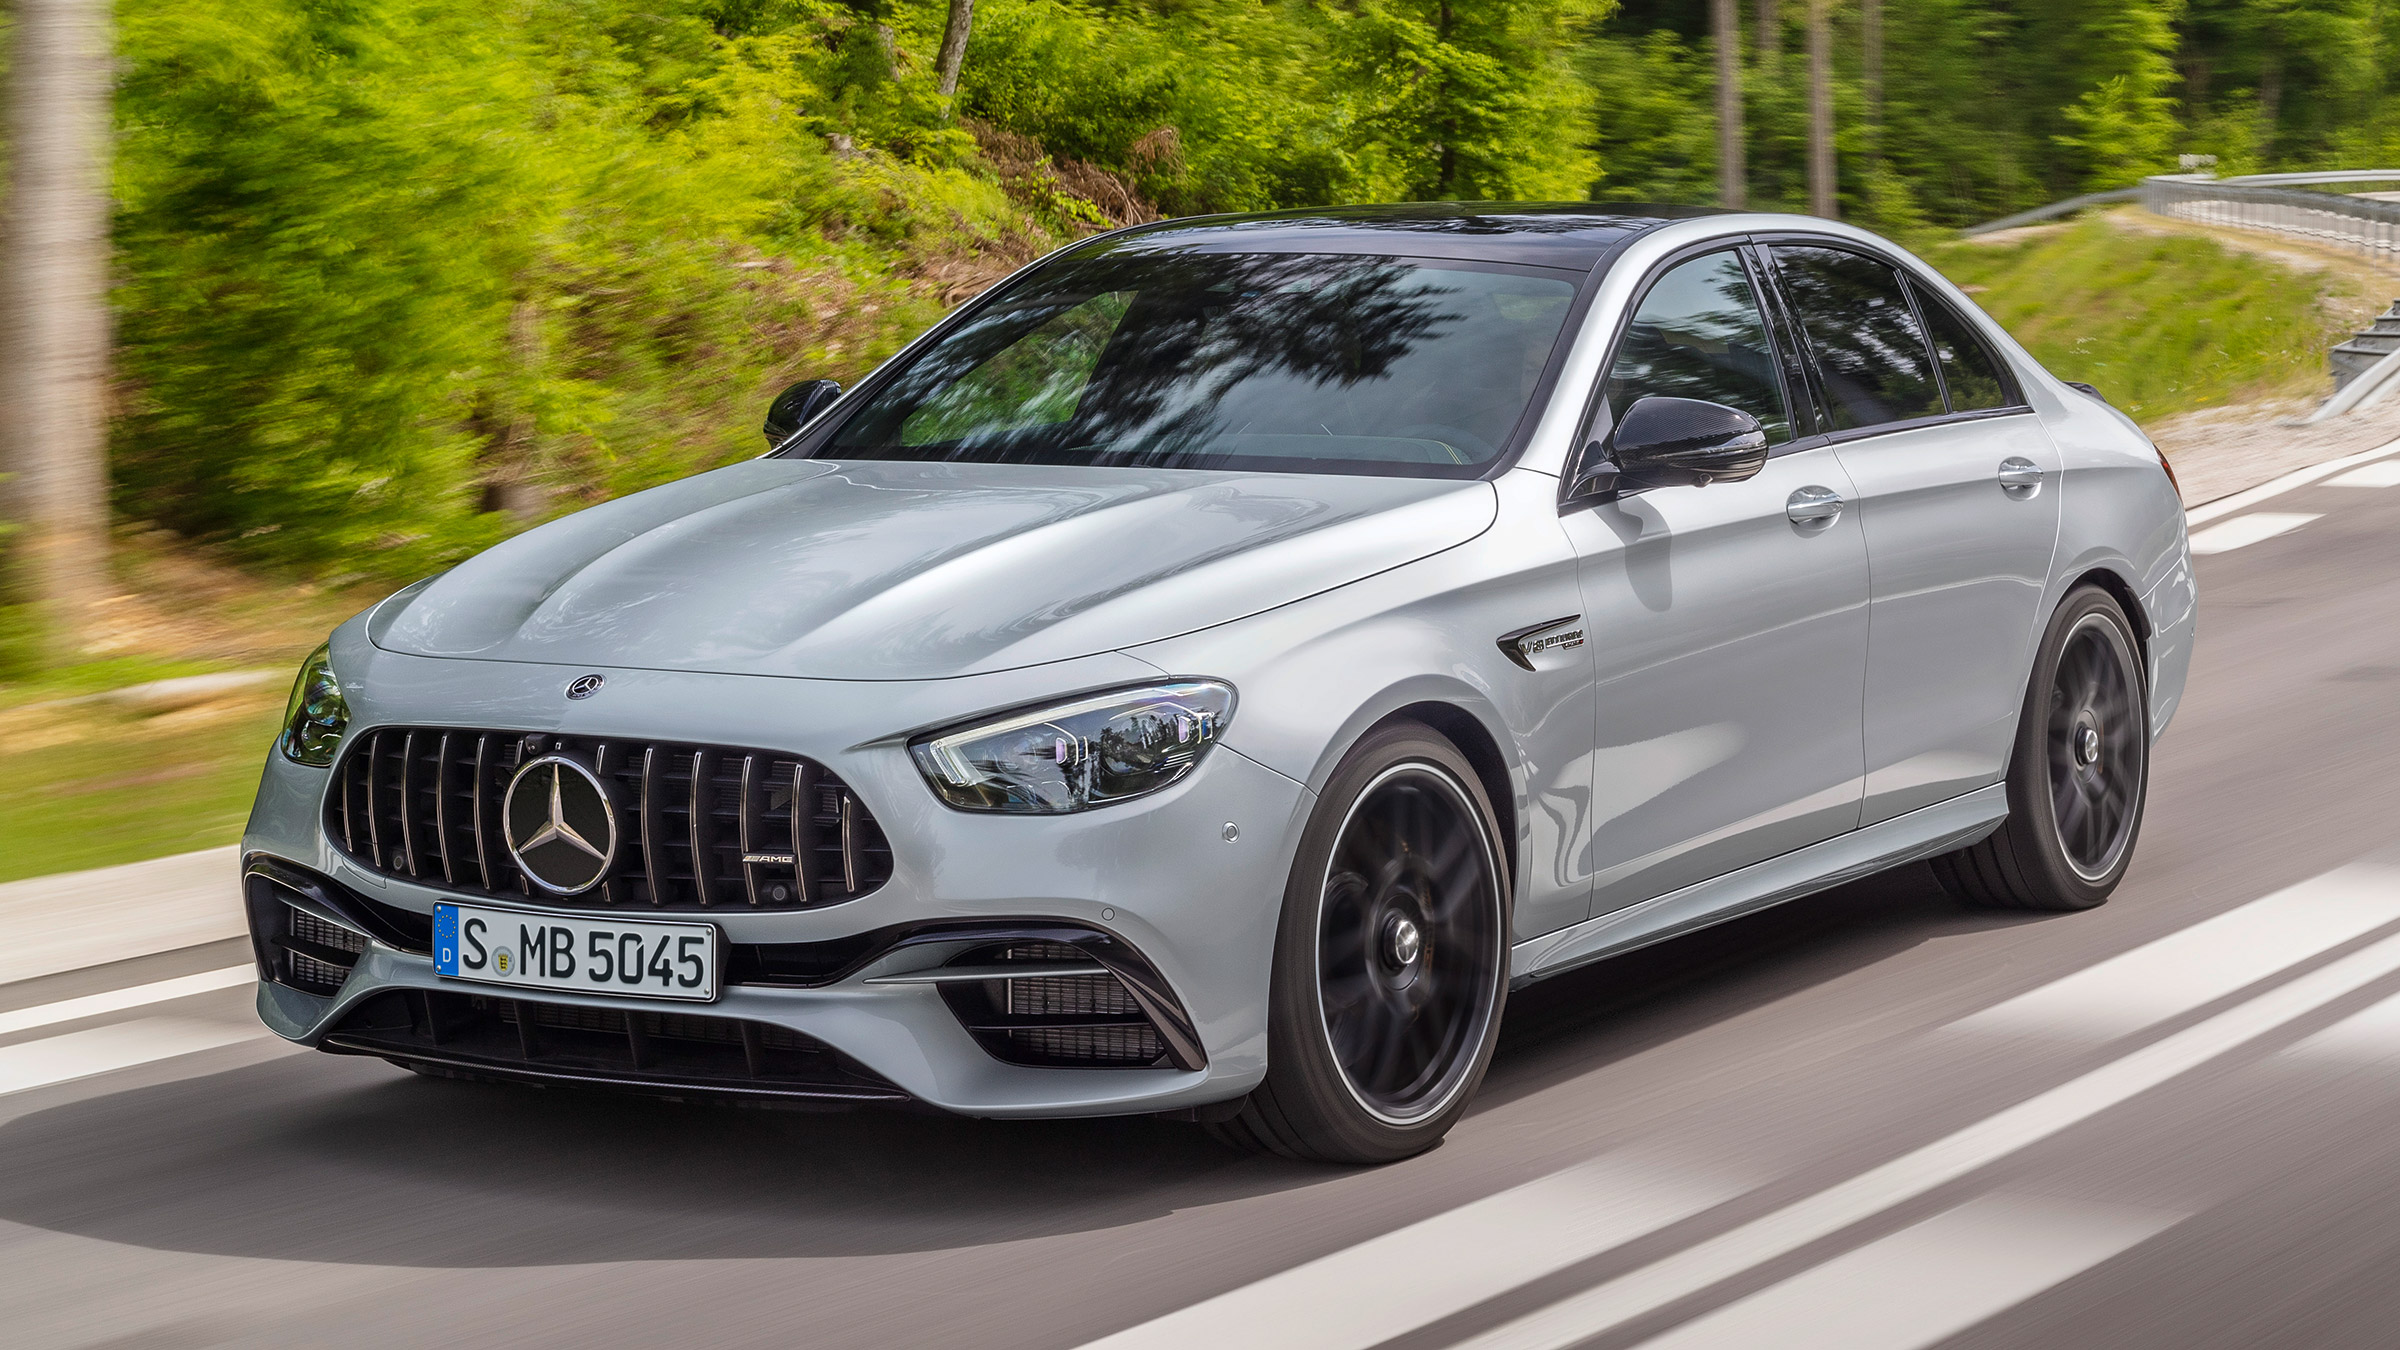 New MercedesAMG E 63 S facelift arrives with styling tweaks and same